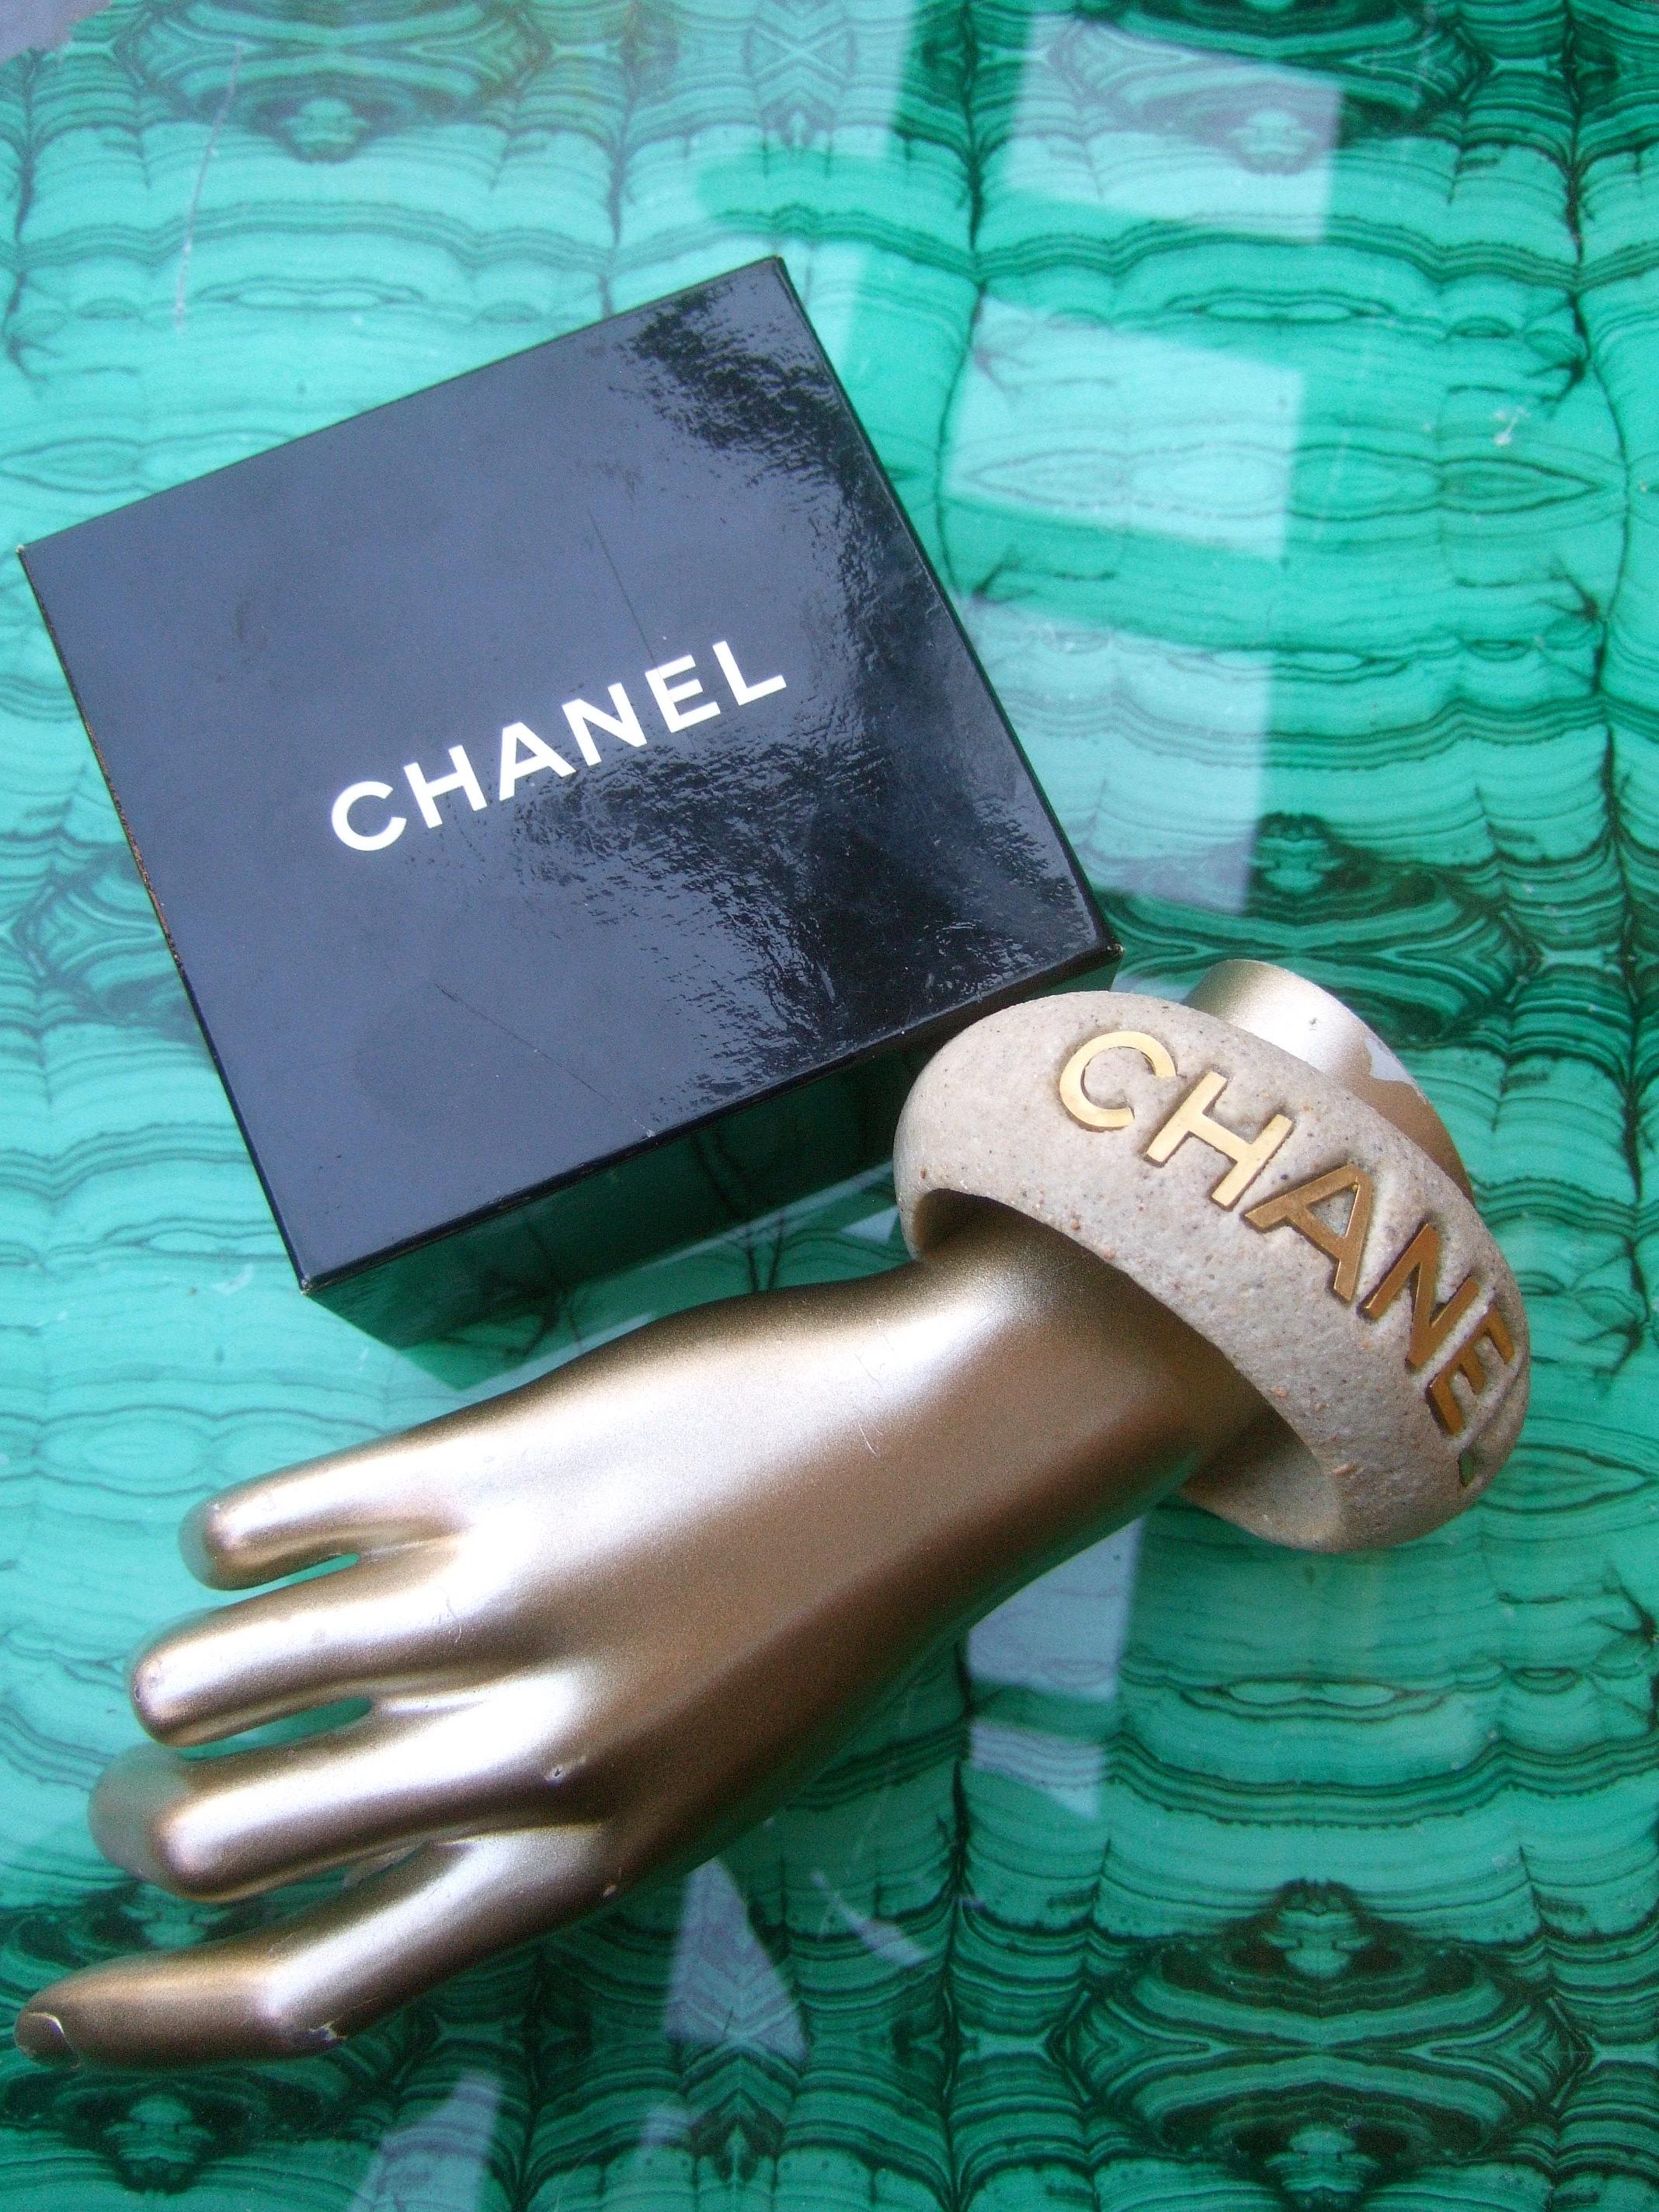 Chanel Wide Molded Bisque Stone Cuff Bracelet in Chanel Presentation Box c 1990s For Sale 4